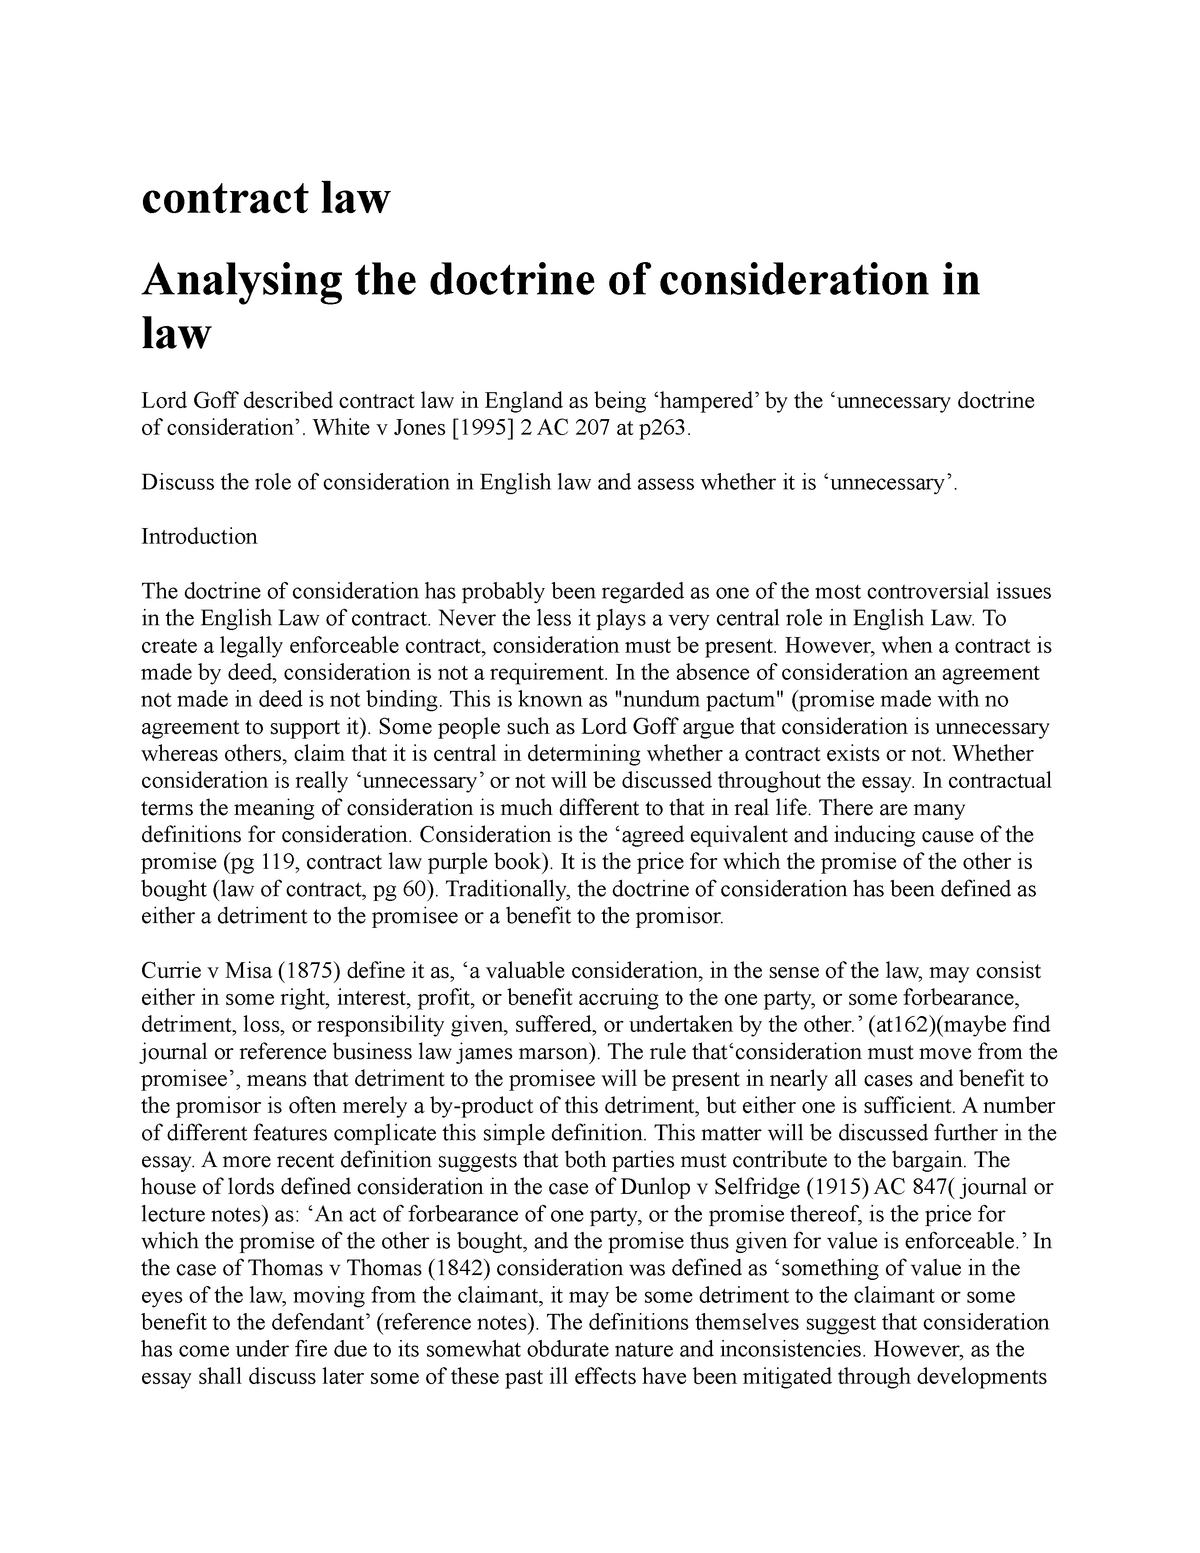 contract law research paper